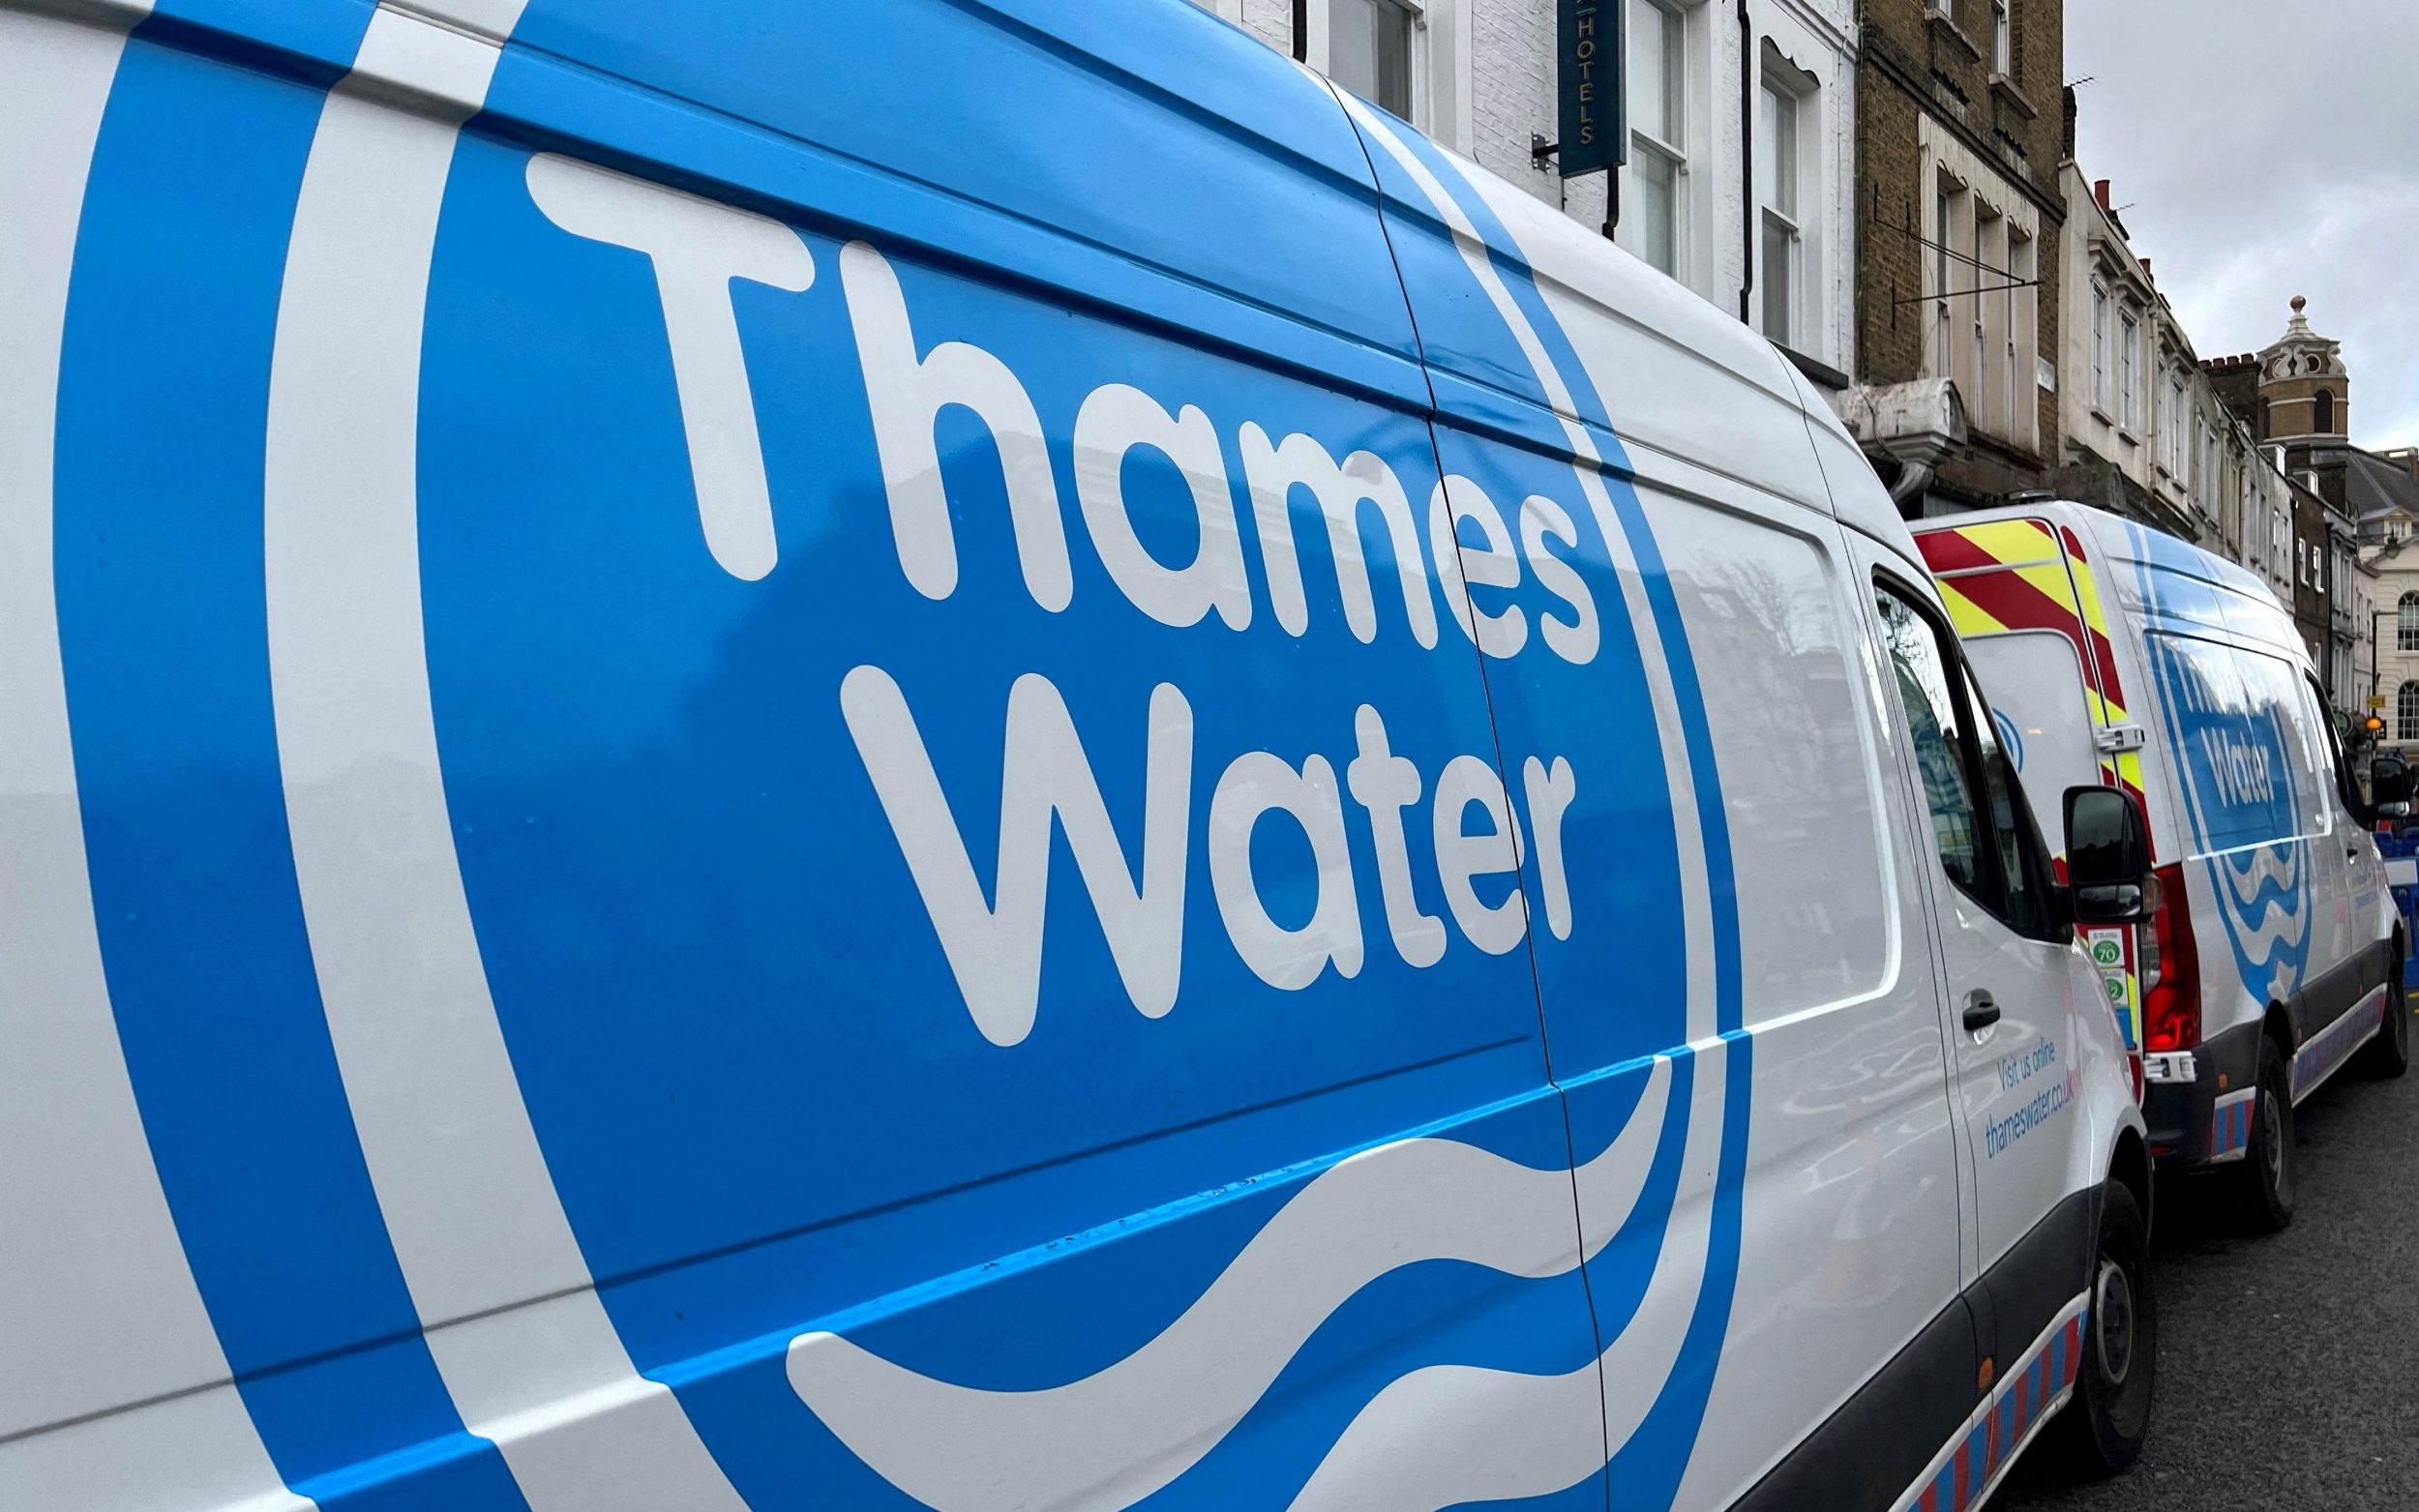 thames water plans £2bn shareholder payouts despite threat of collapse